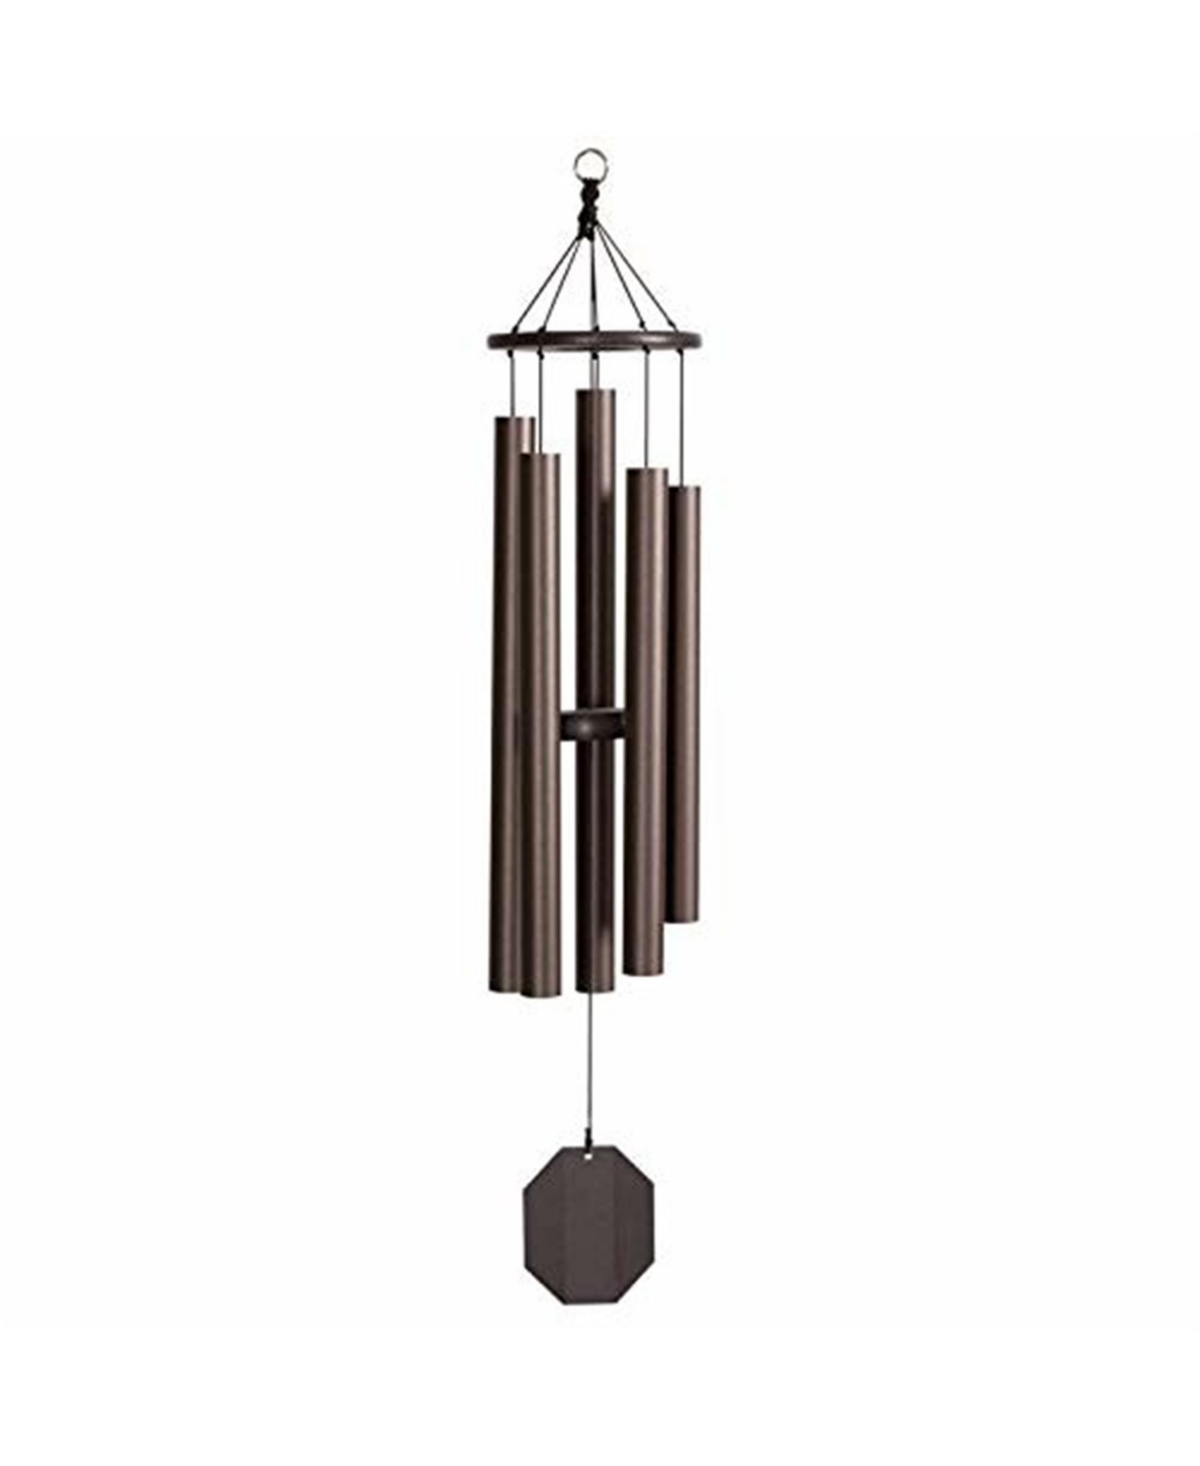 15510375 Lambright Amish Crafted Chime Baby Ben Wind Chime, sku 15510375